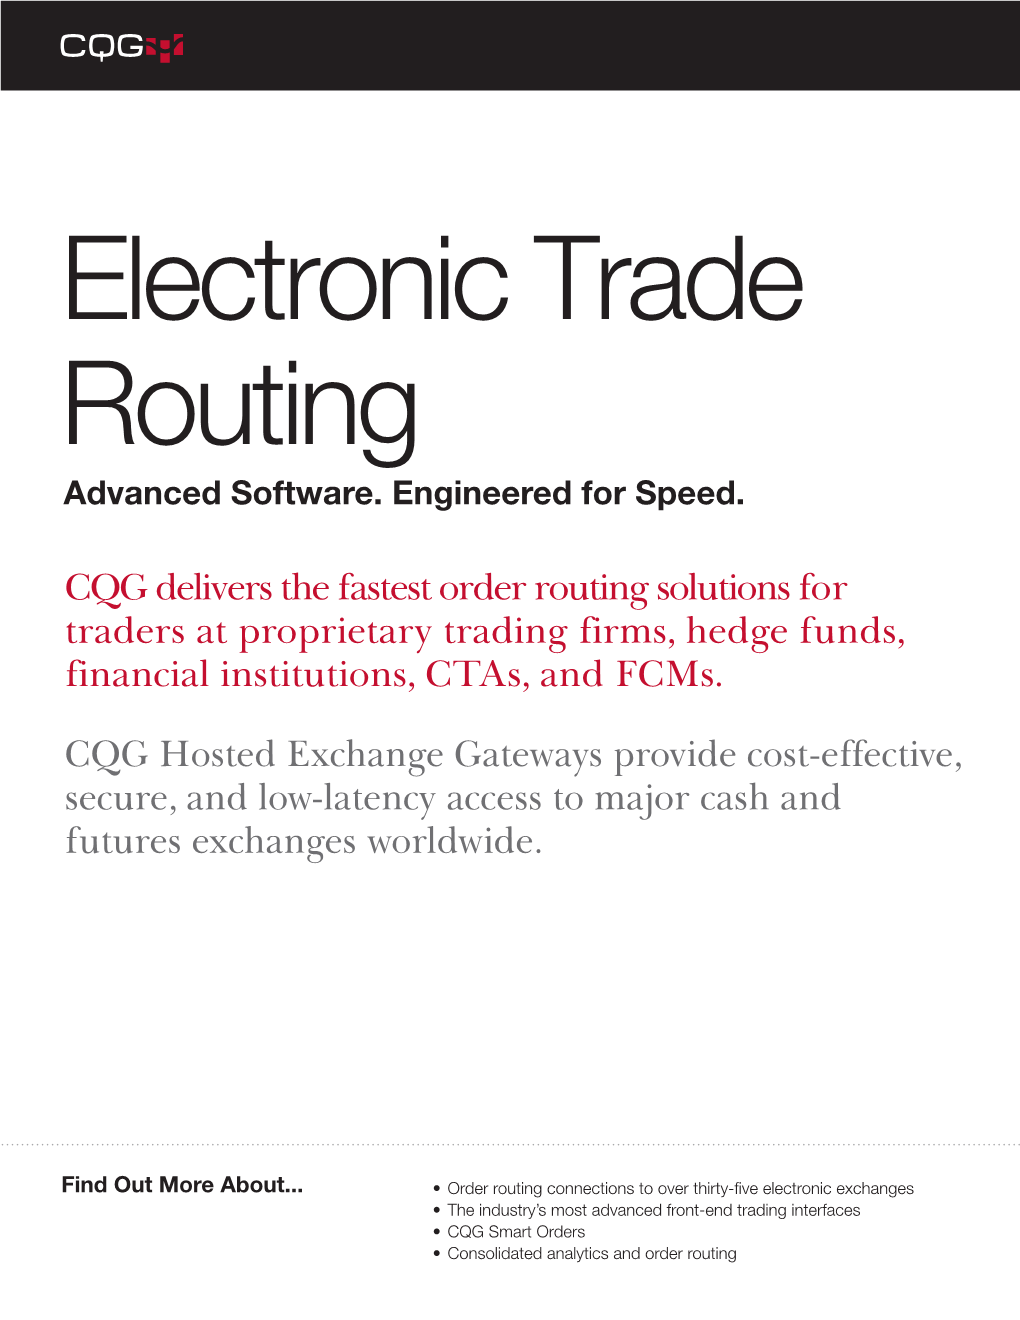 CQG Delivers the Fastest Order Routing Solutions for Traders at Proprietary Trading Firms, Hedge Funds, Financial Institutions, Ctas, and Fcms